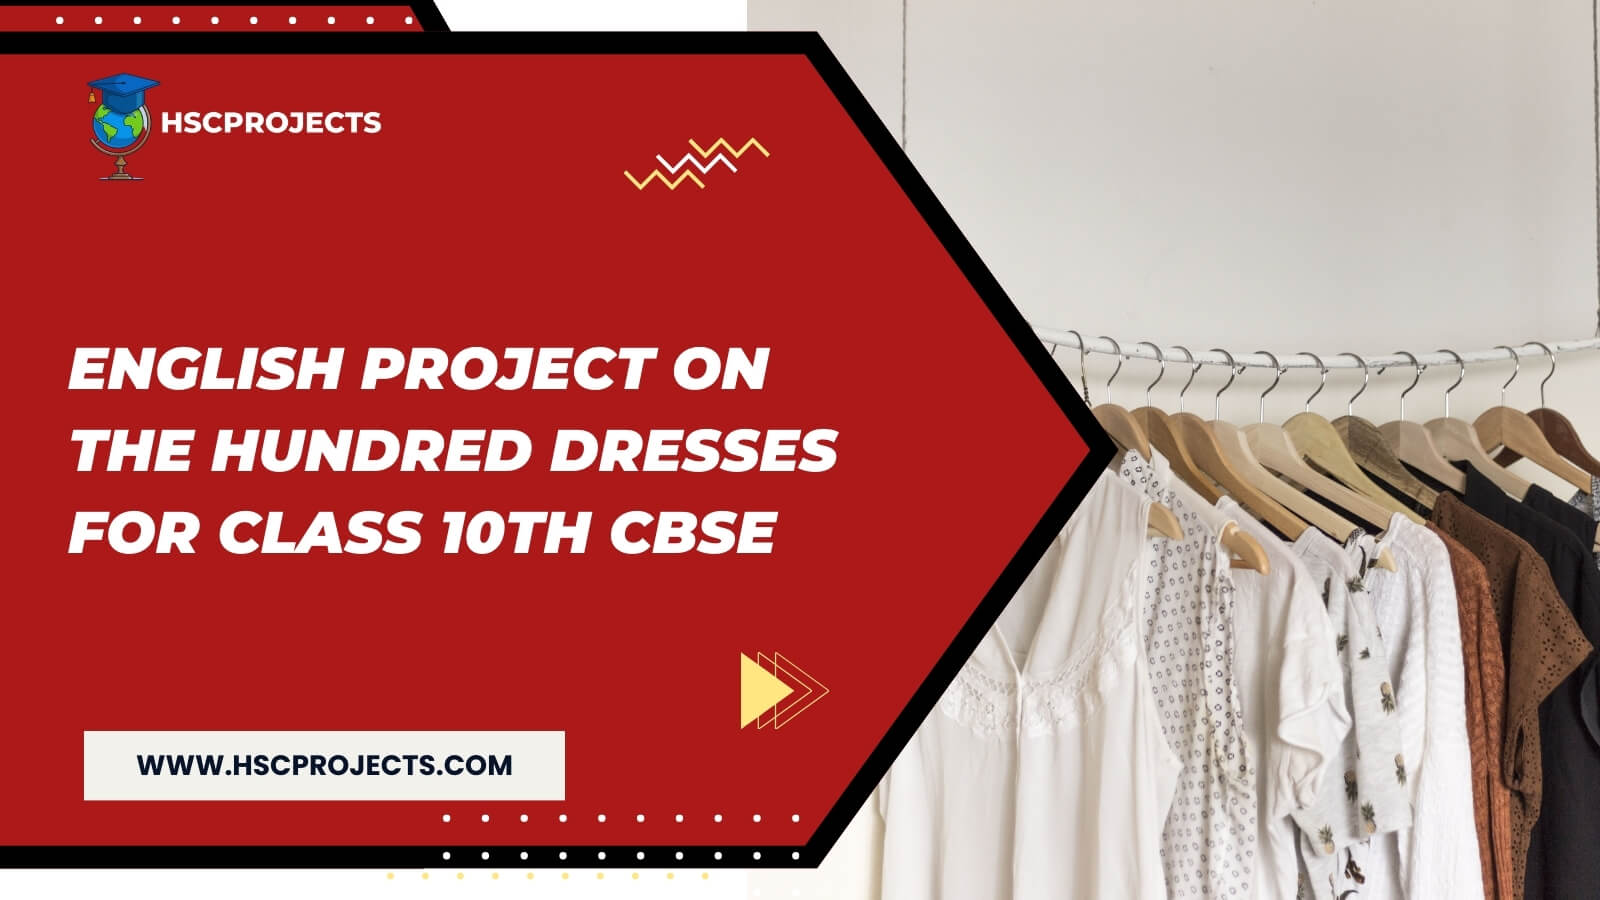 English Project On The Hundred Dresses For Class 10th CBSE